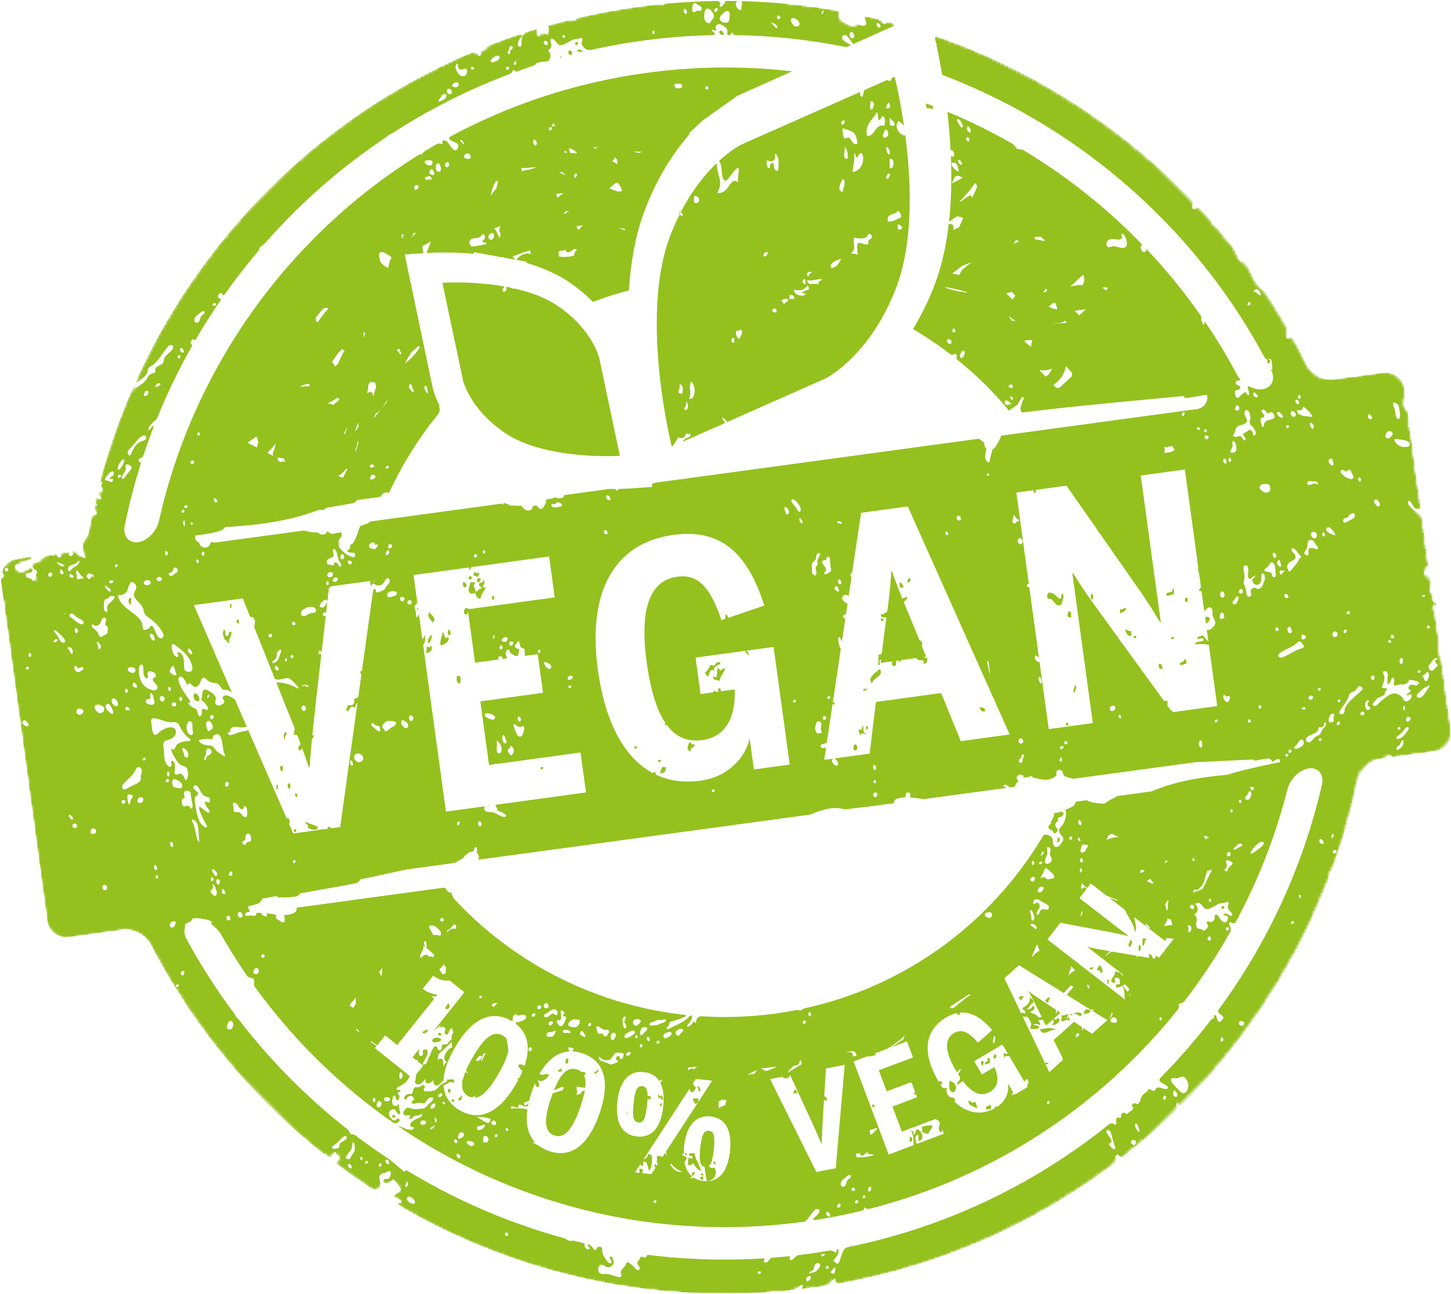 Subscribe To Our Vegan Newsletter - 100% Vegan Logo Png (1457x1304)